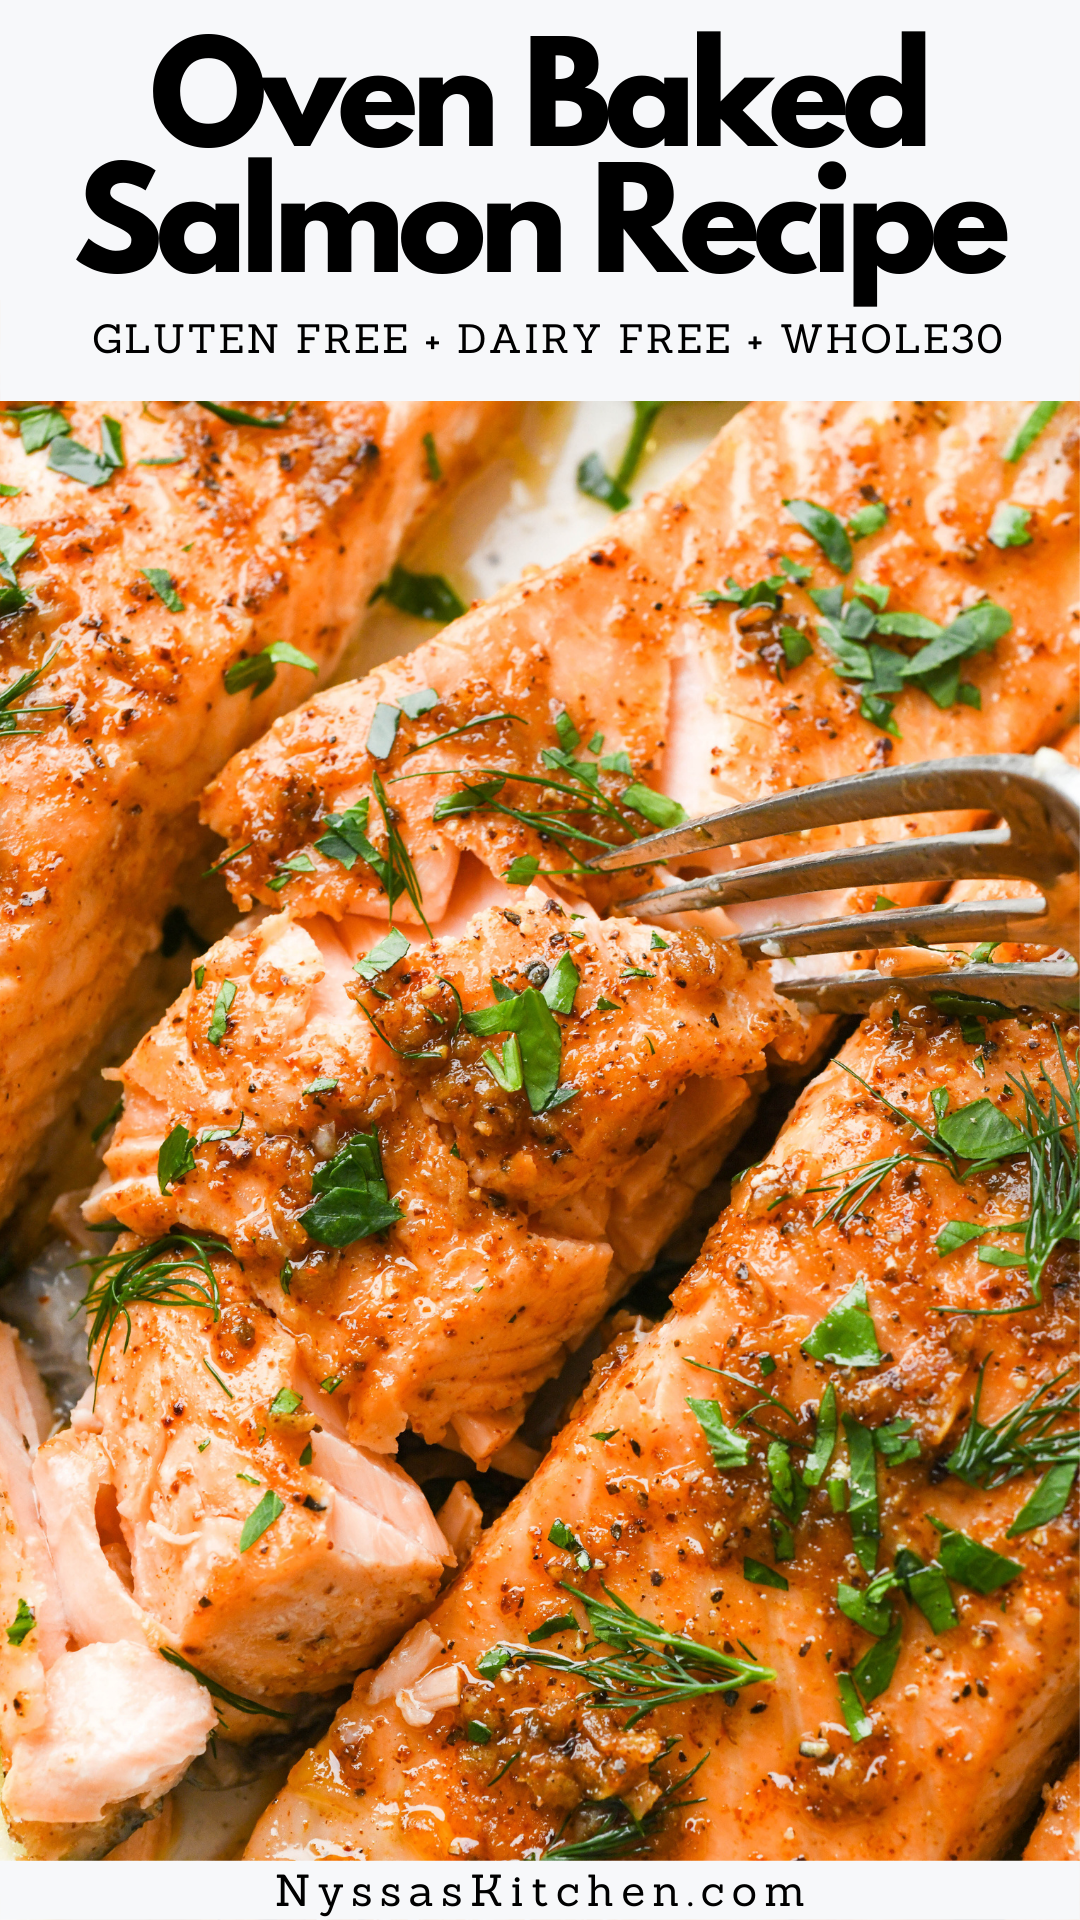 Say hello to the BEST healthy baked salmon recipe! Made with simple ingredients like garlic, paprika, avocado oil, lemon juice, salt, pepper, and fresh herbs. It is out of this world flavorful, perfectly cooked, and just as good for a busy weeknight dinner as it is for a dinner party. Gluten free, dairy free, Whole30, paleo, keto, and low carb.